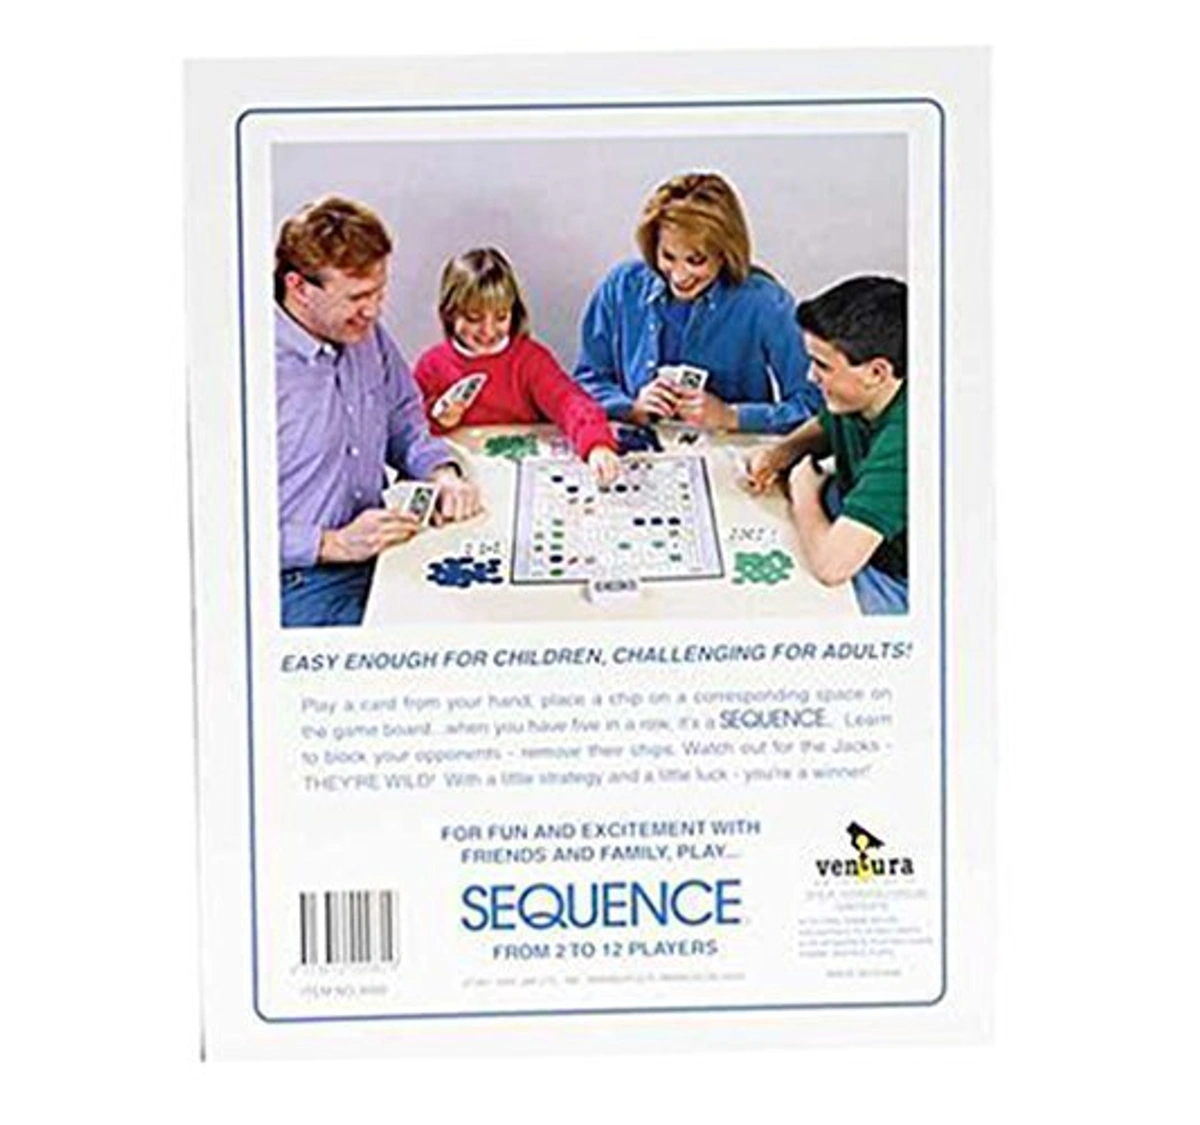 Jax SEQUENCE Board Game